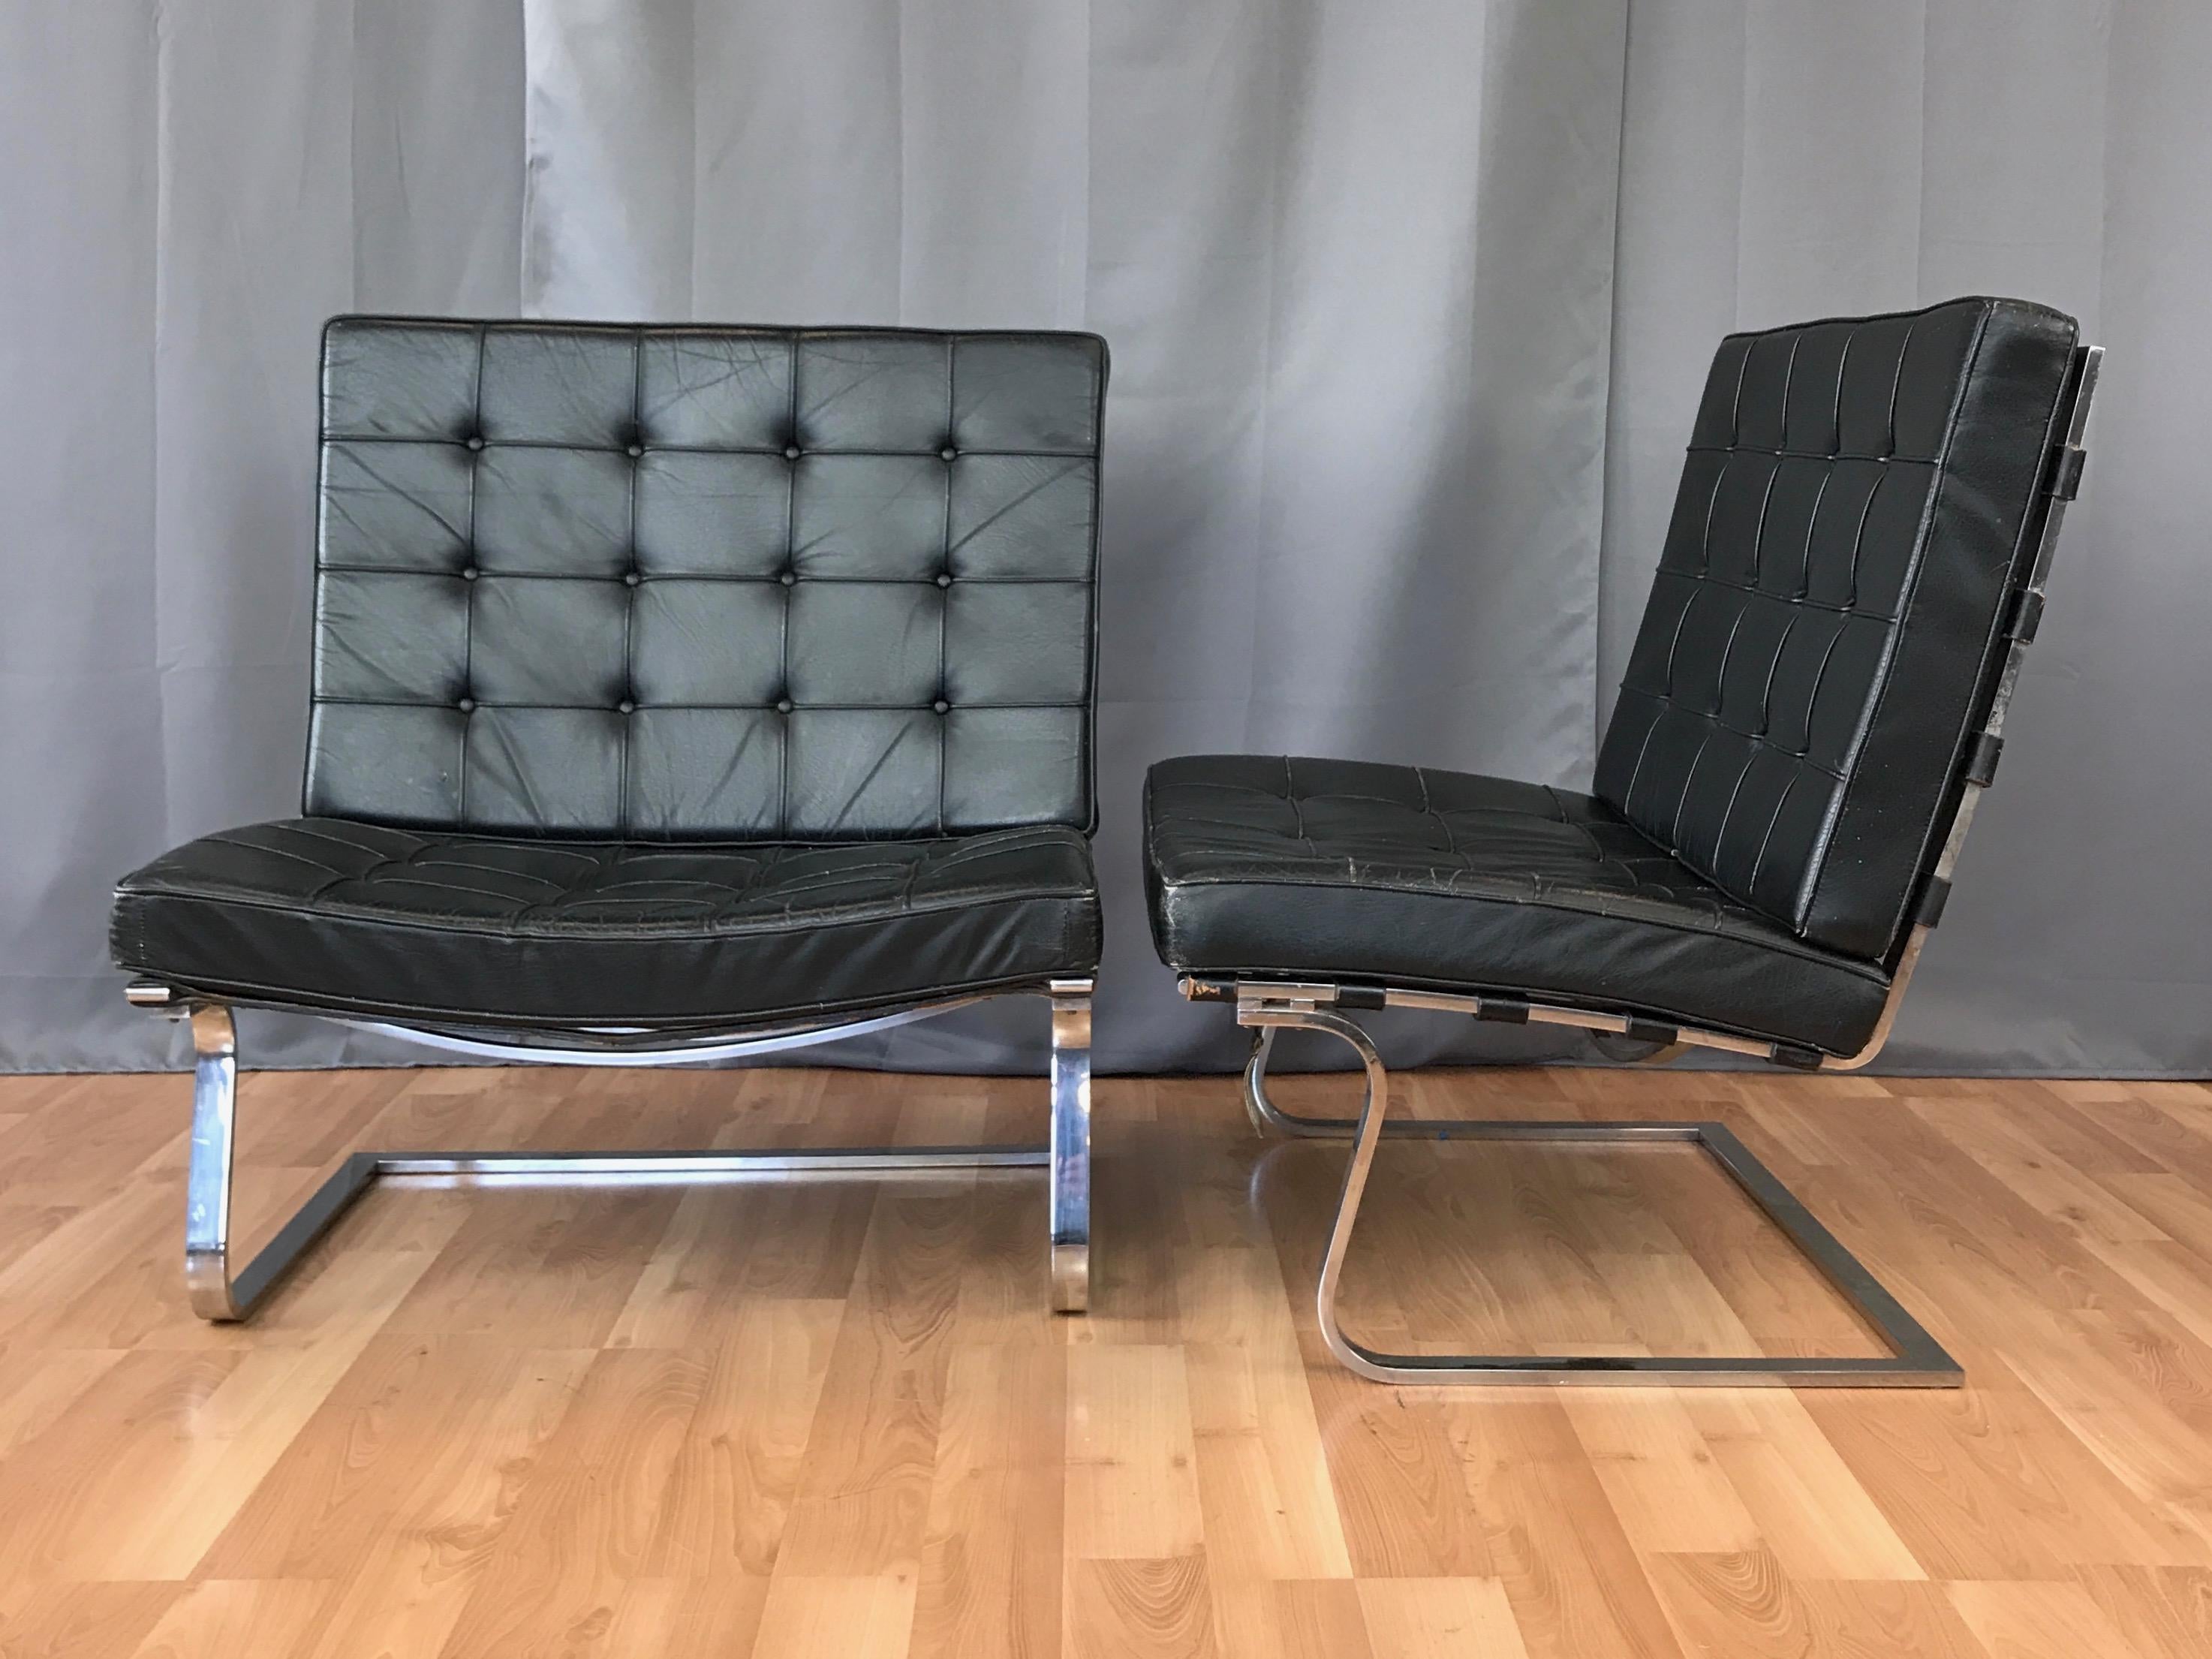 A rare pair of vintage MR70 Tugendhat black leather chairs designed by Mies van der Rohe and Lilly Reich in 1929–1930, and produced by Knoll International in the late 1960s.

Modernist cantilevered chair originally created for the Tugendhat House in